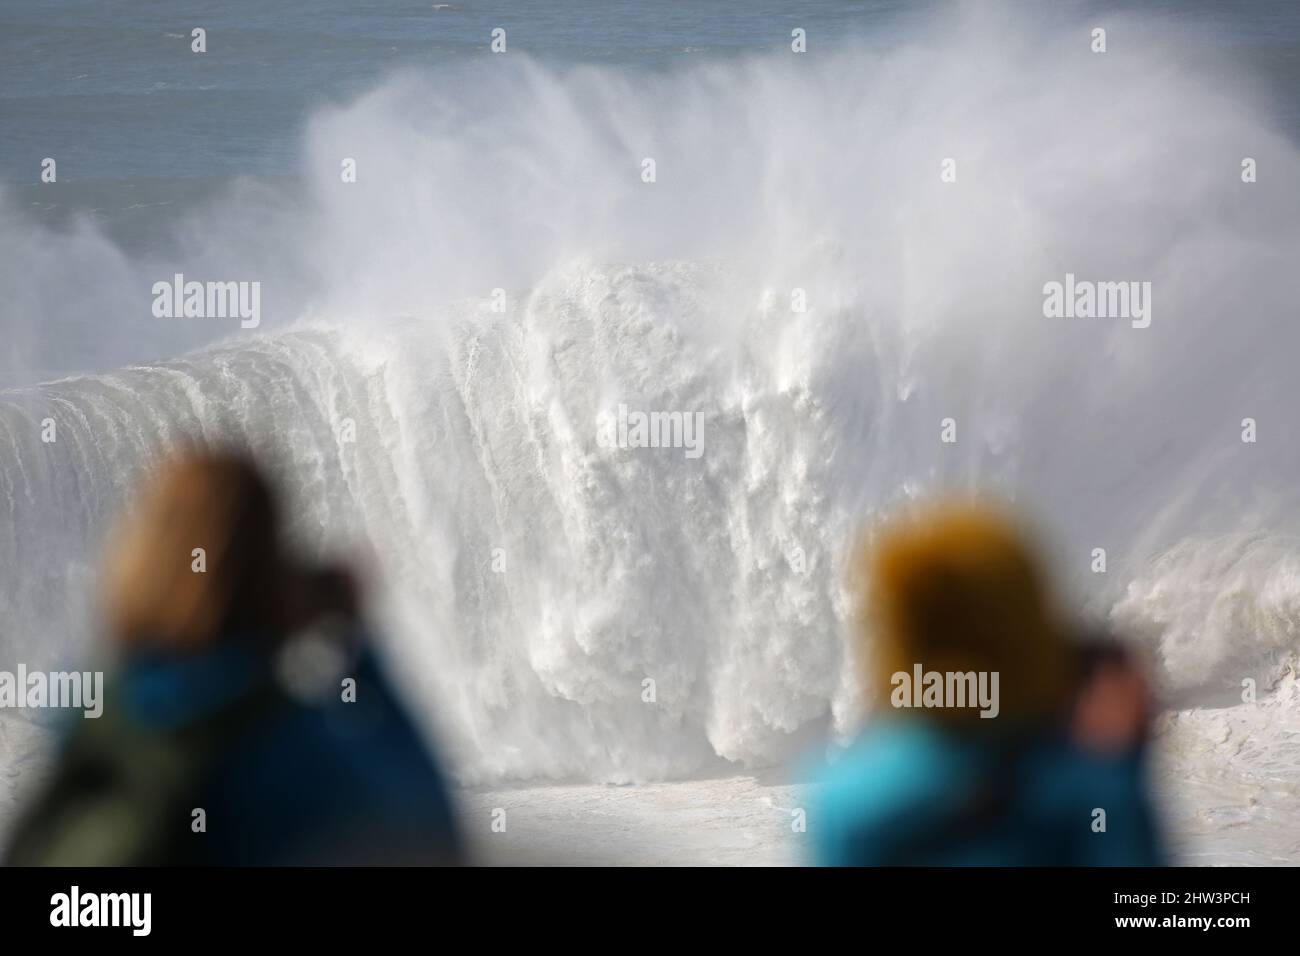 A giant wave breaking while two female spectactors watch and photograph in awe. Praia do Norte, Nazaré, Portugal. Stock Photo